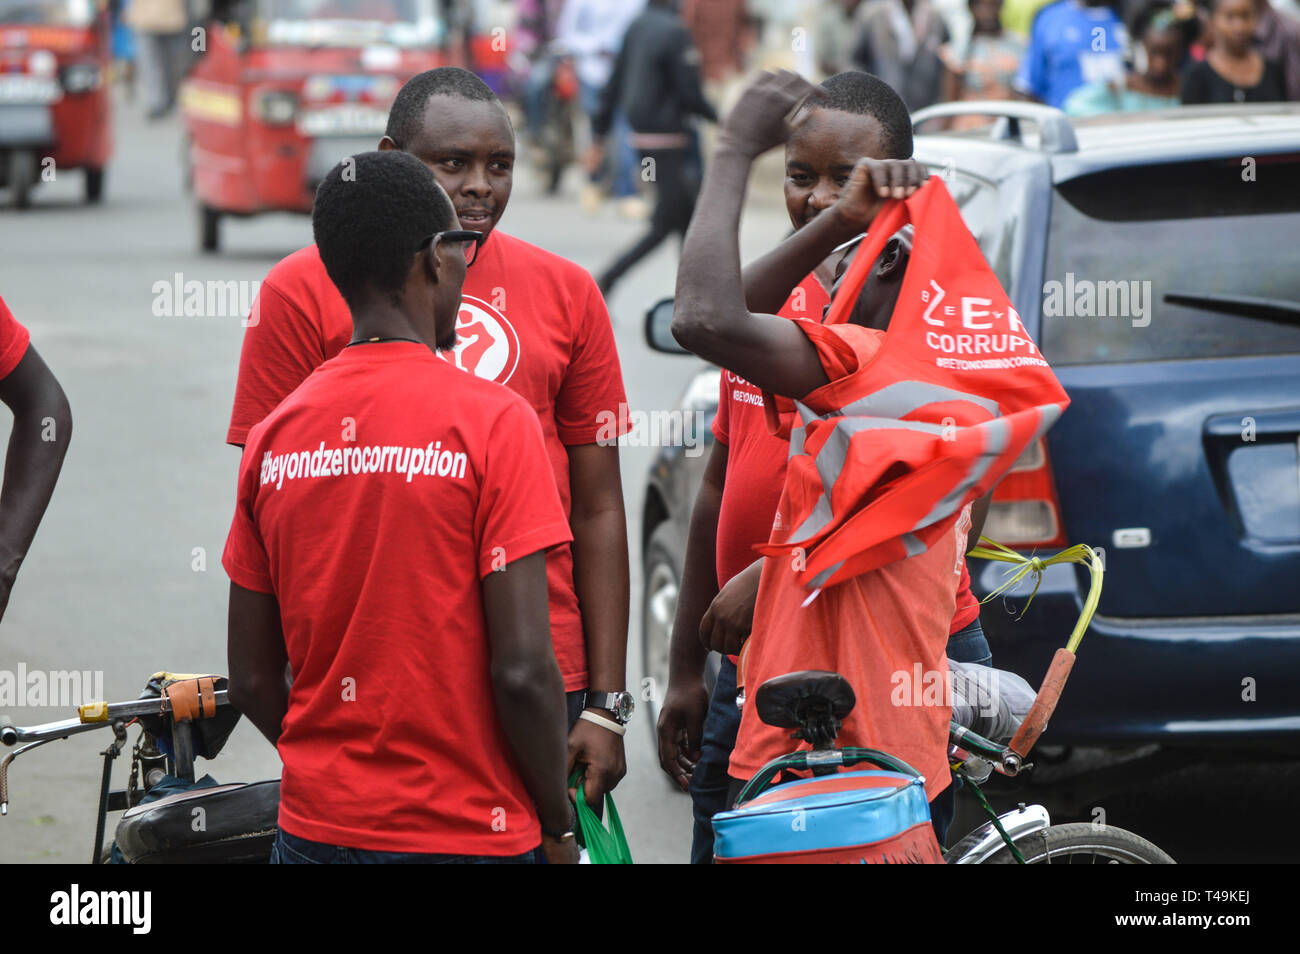 Nakuru, Rift Valley, Kenya. 14th Apr, 2019. A group of activists allied to Kenya's Red Vests Movement are seen engaging a member of the public in the streets of Nakuru during the anti-corruption protest.Activists allied to Kenya's Red Vests Movement were protesting silently about increased levels of corruption in the government, the activists are demanding action to be taken against all government officials involved in corruption. Credit: ZUMA Press, Inc./Alamy Live News Stock Photo